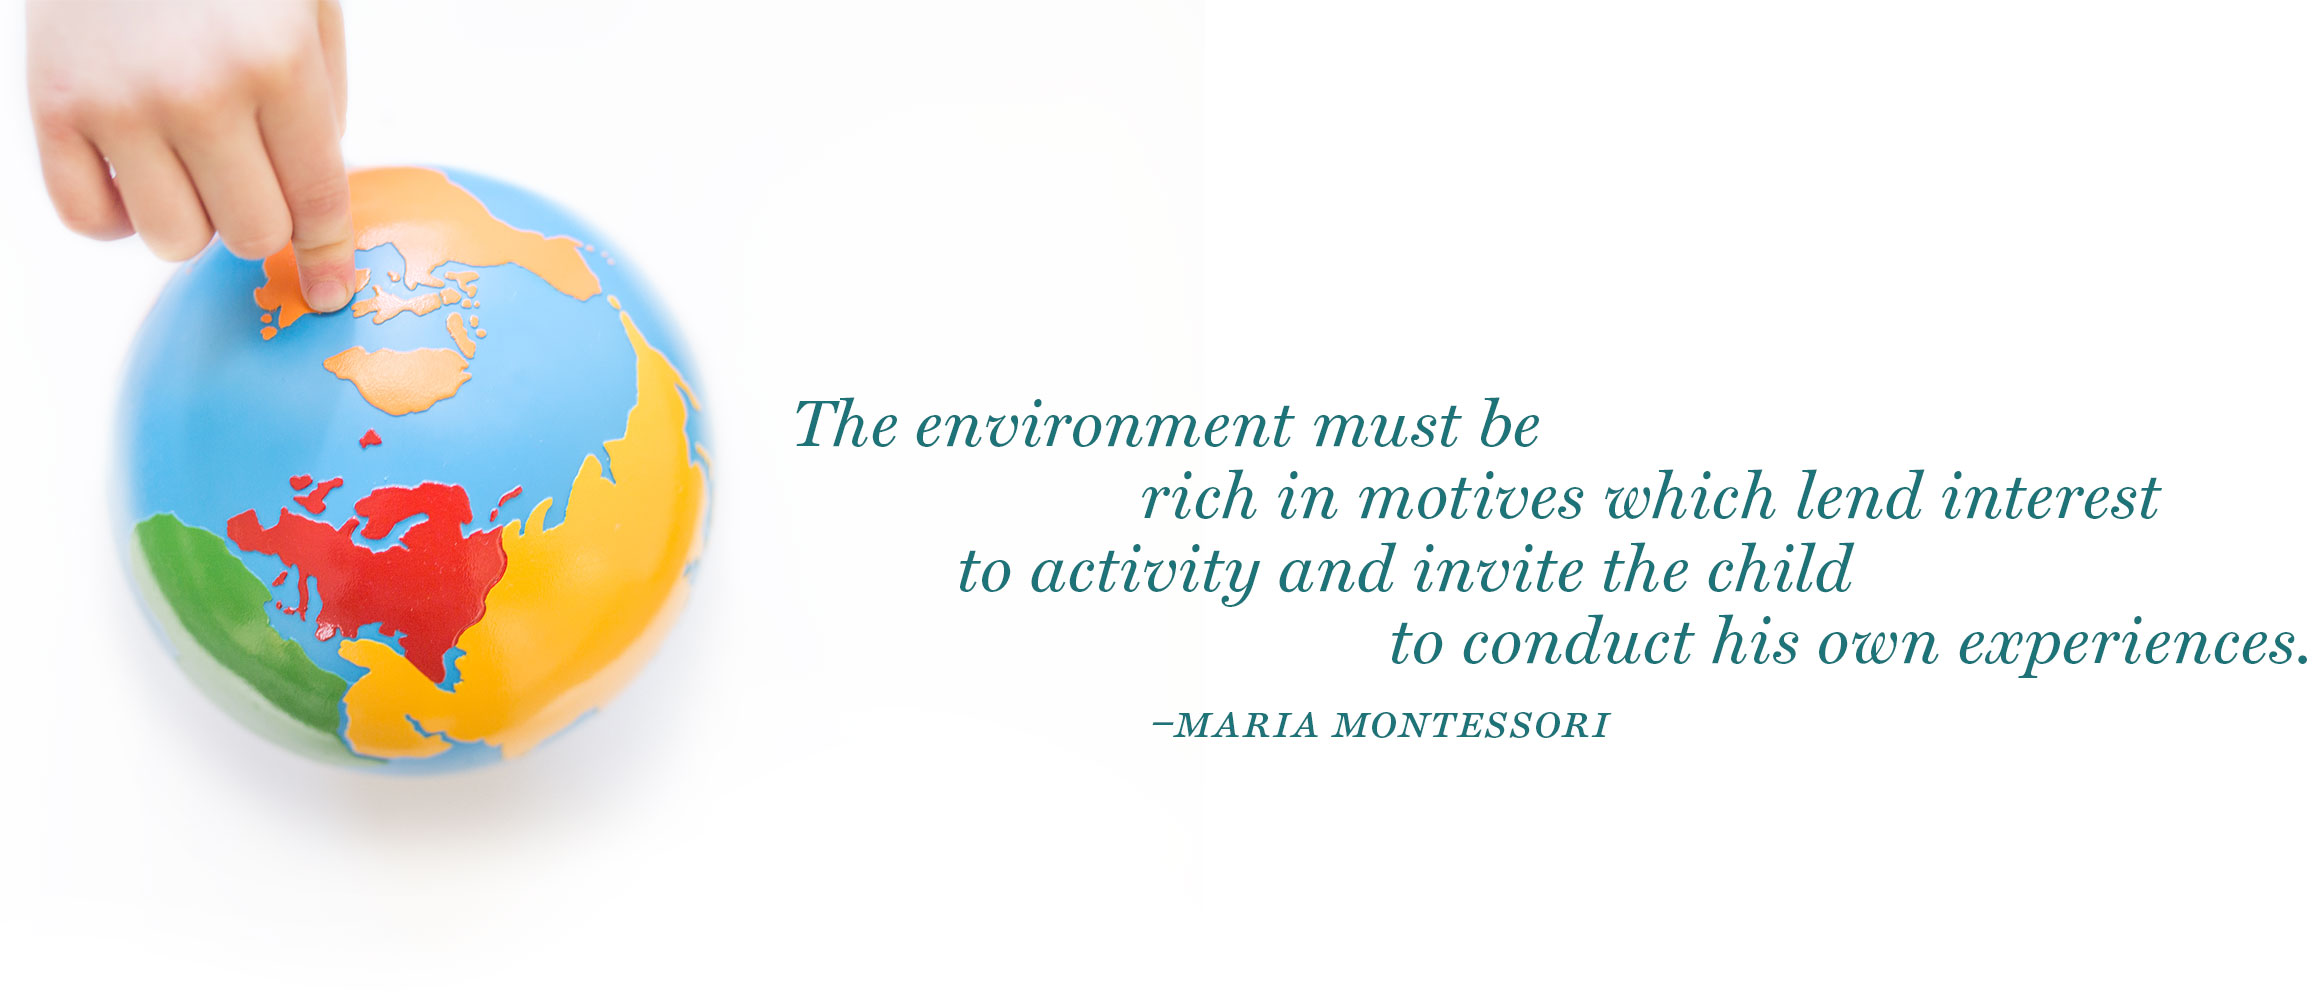 Maria Montessori Quote-The environment must be rich in motives which lend interest to activity and invite the child to conduct his own experiences.